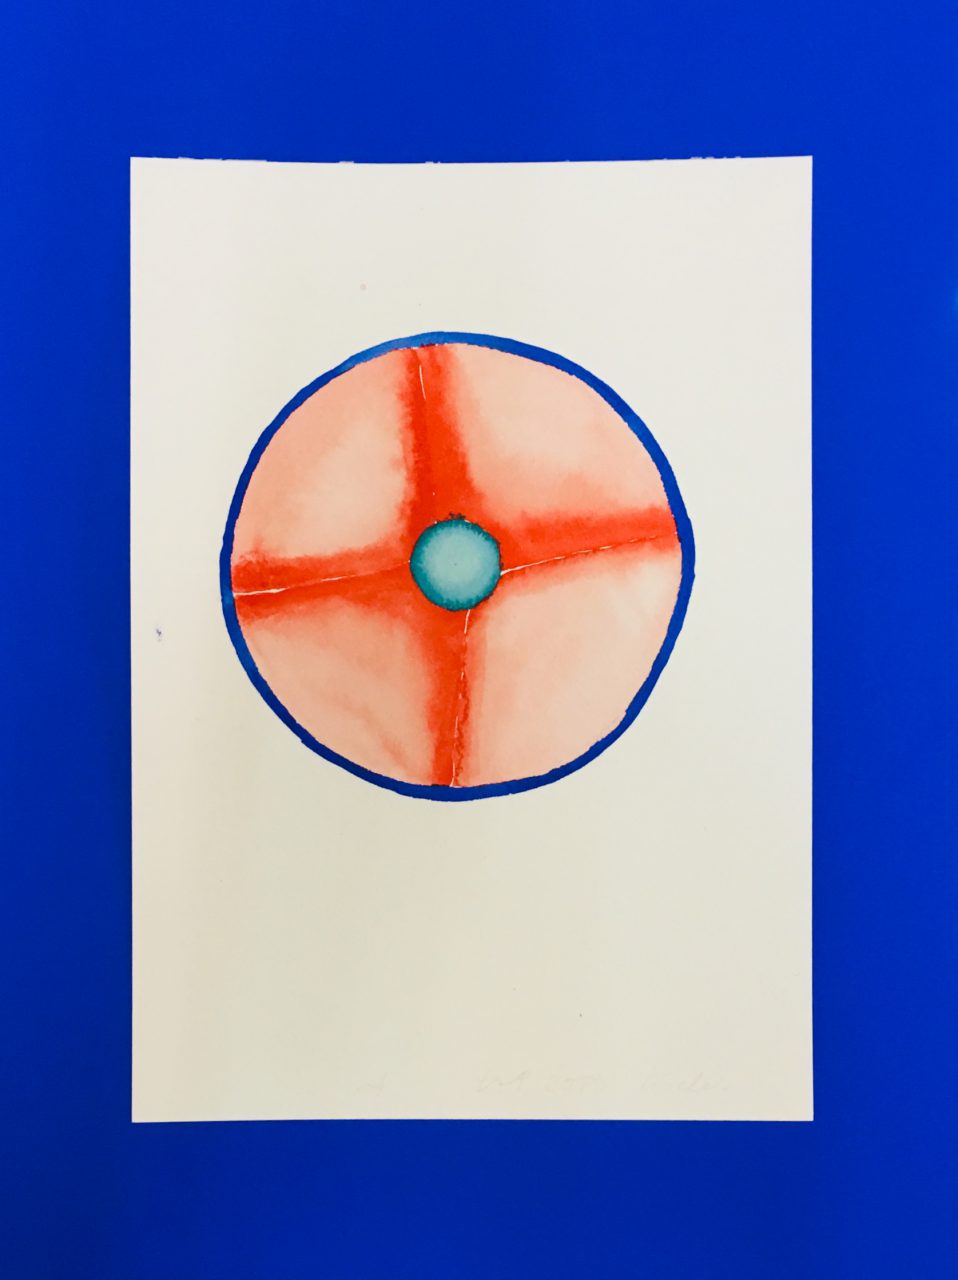 hermes circles, watercolour on paper, 2019